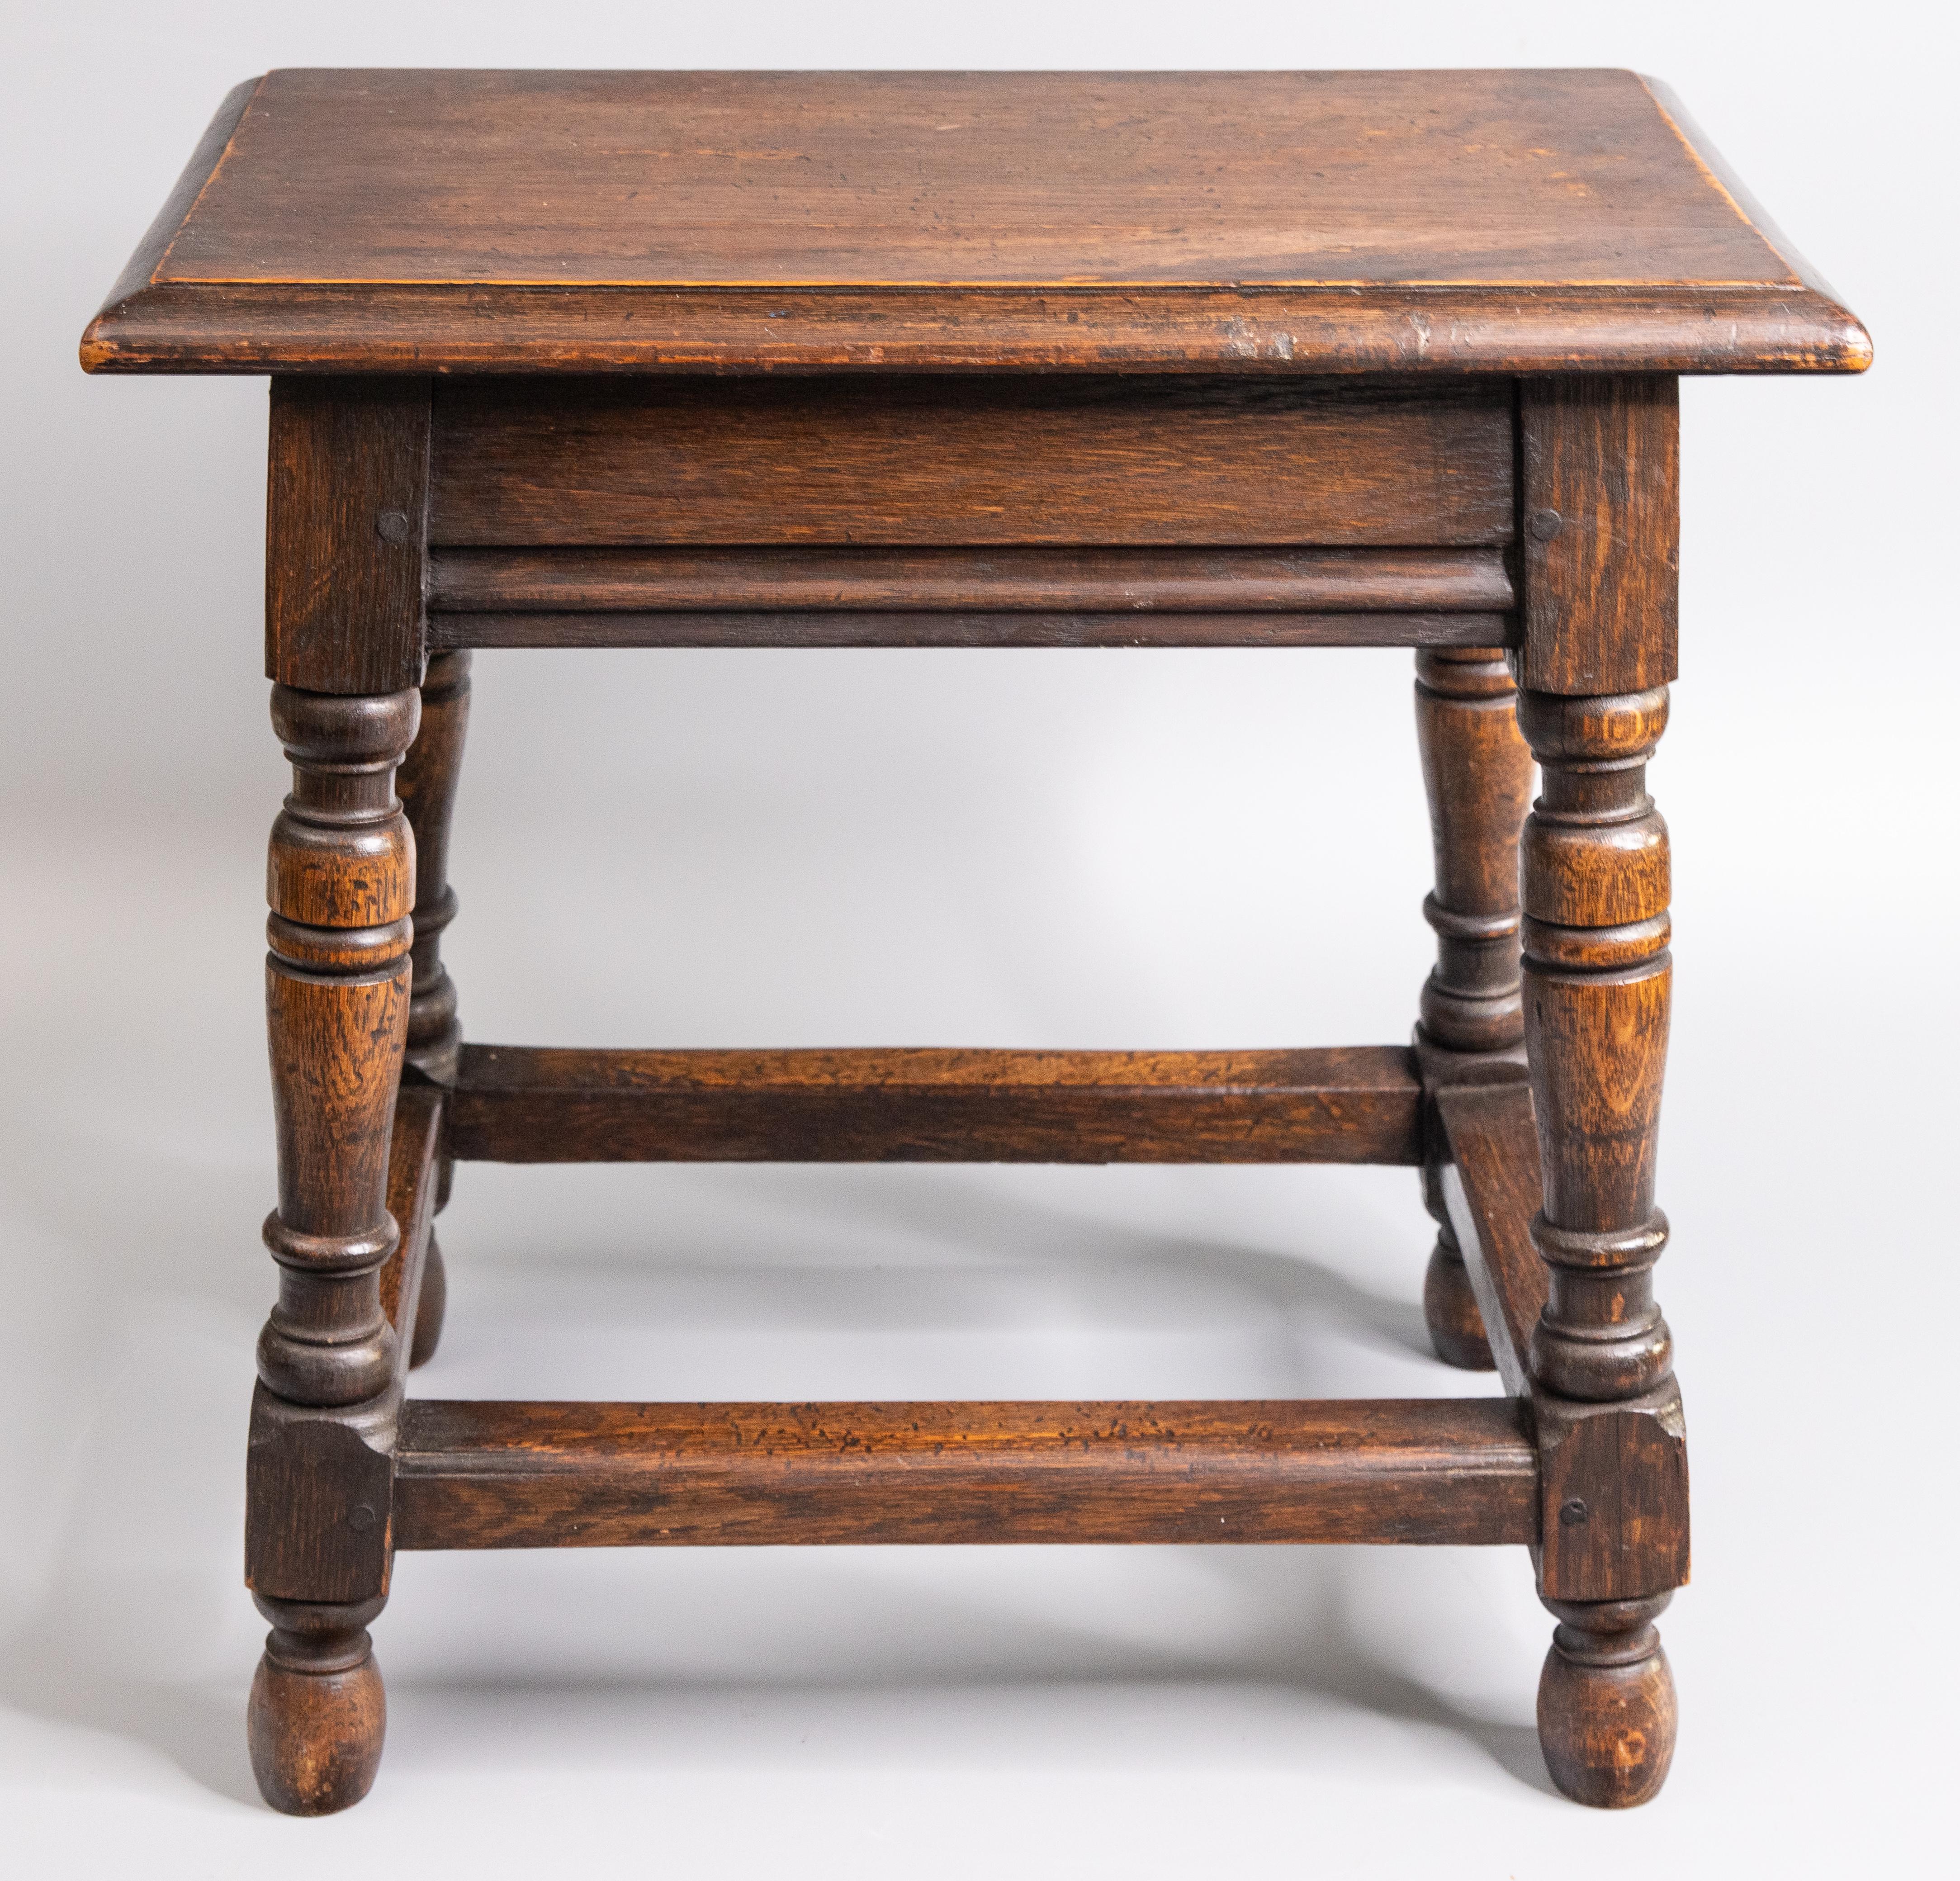 19th Century English Oak Pegged Joint Stool Side Table In Good Condition For Sale In Pearland, TX